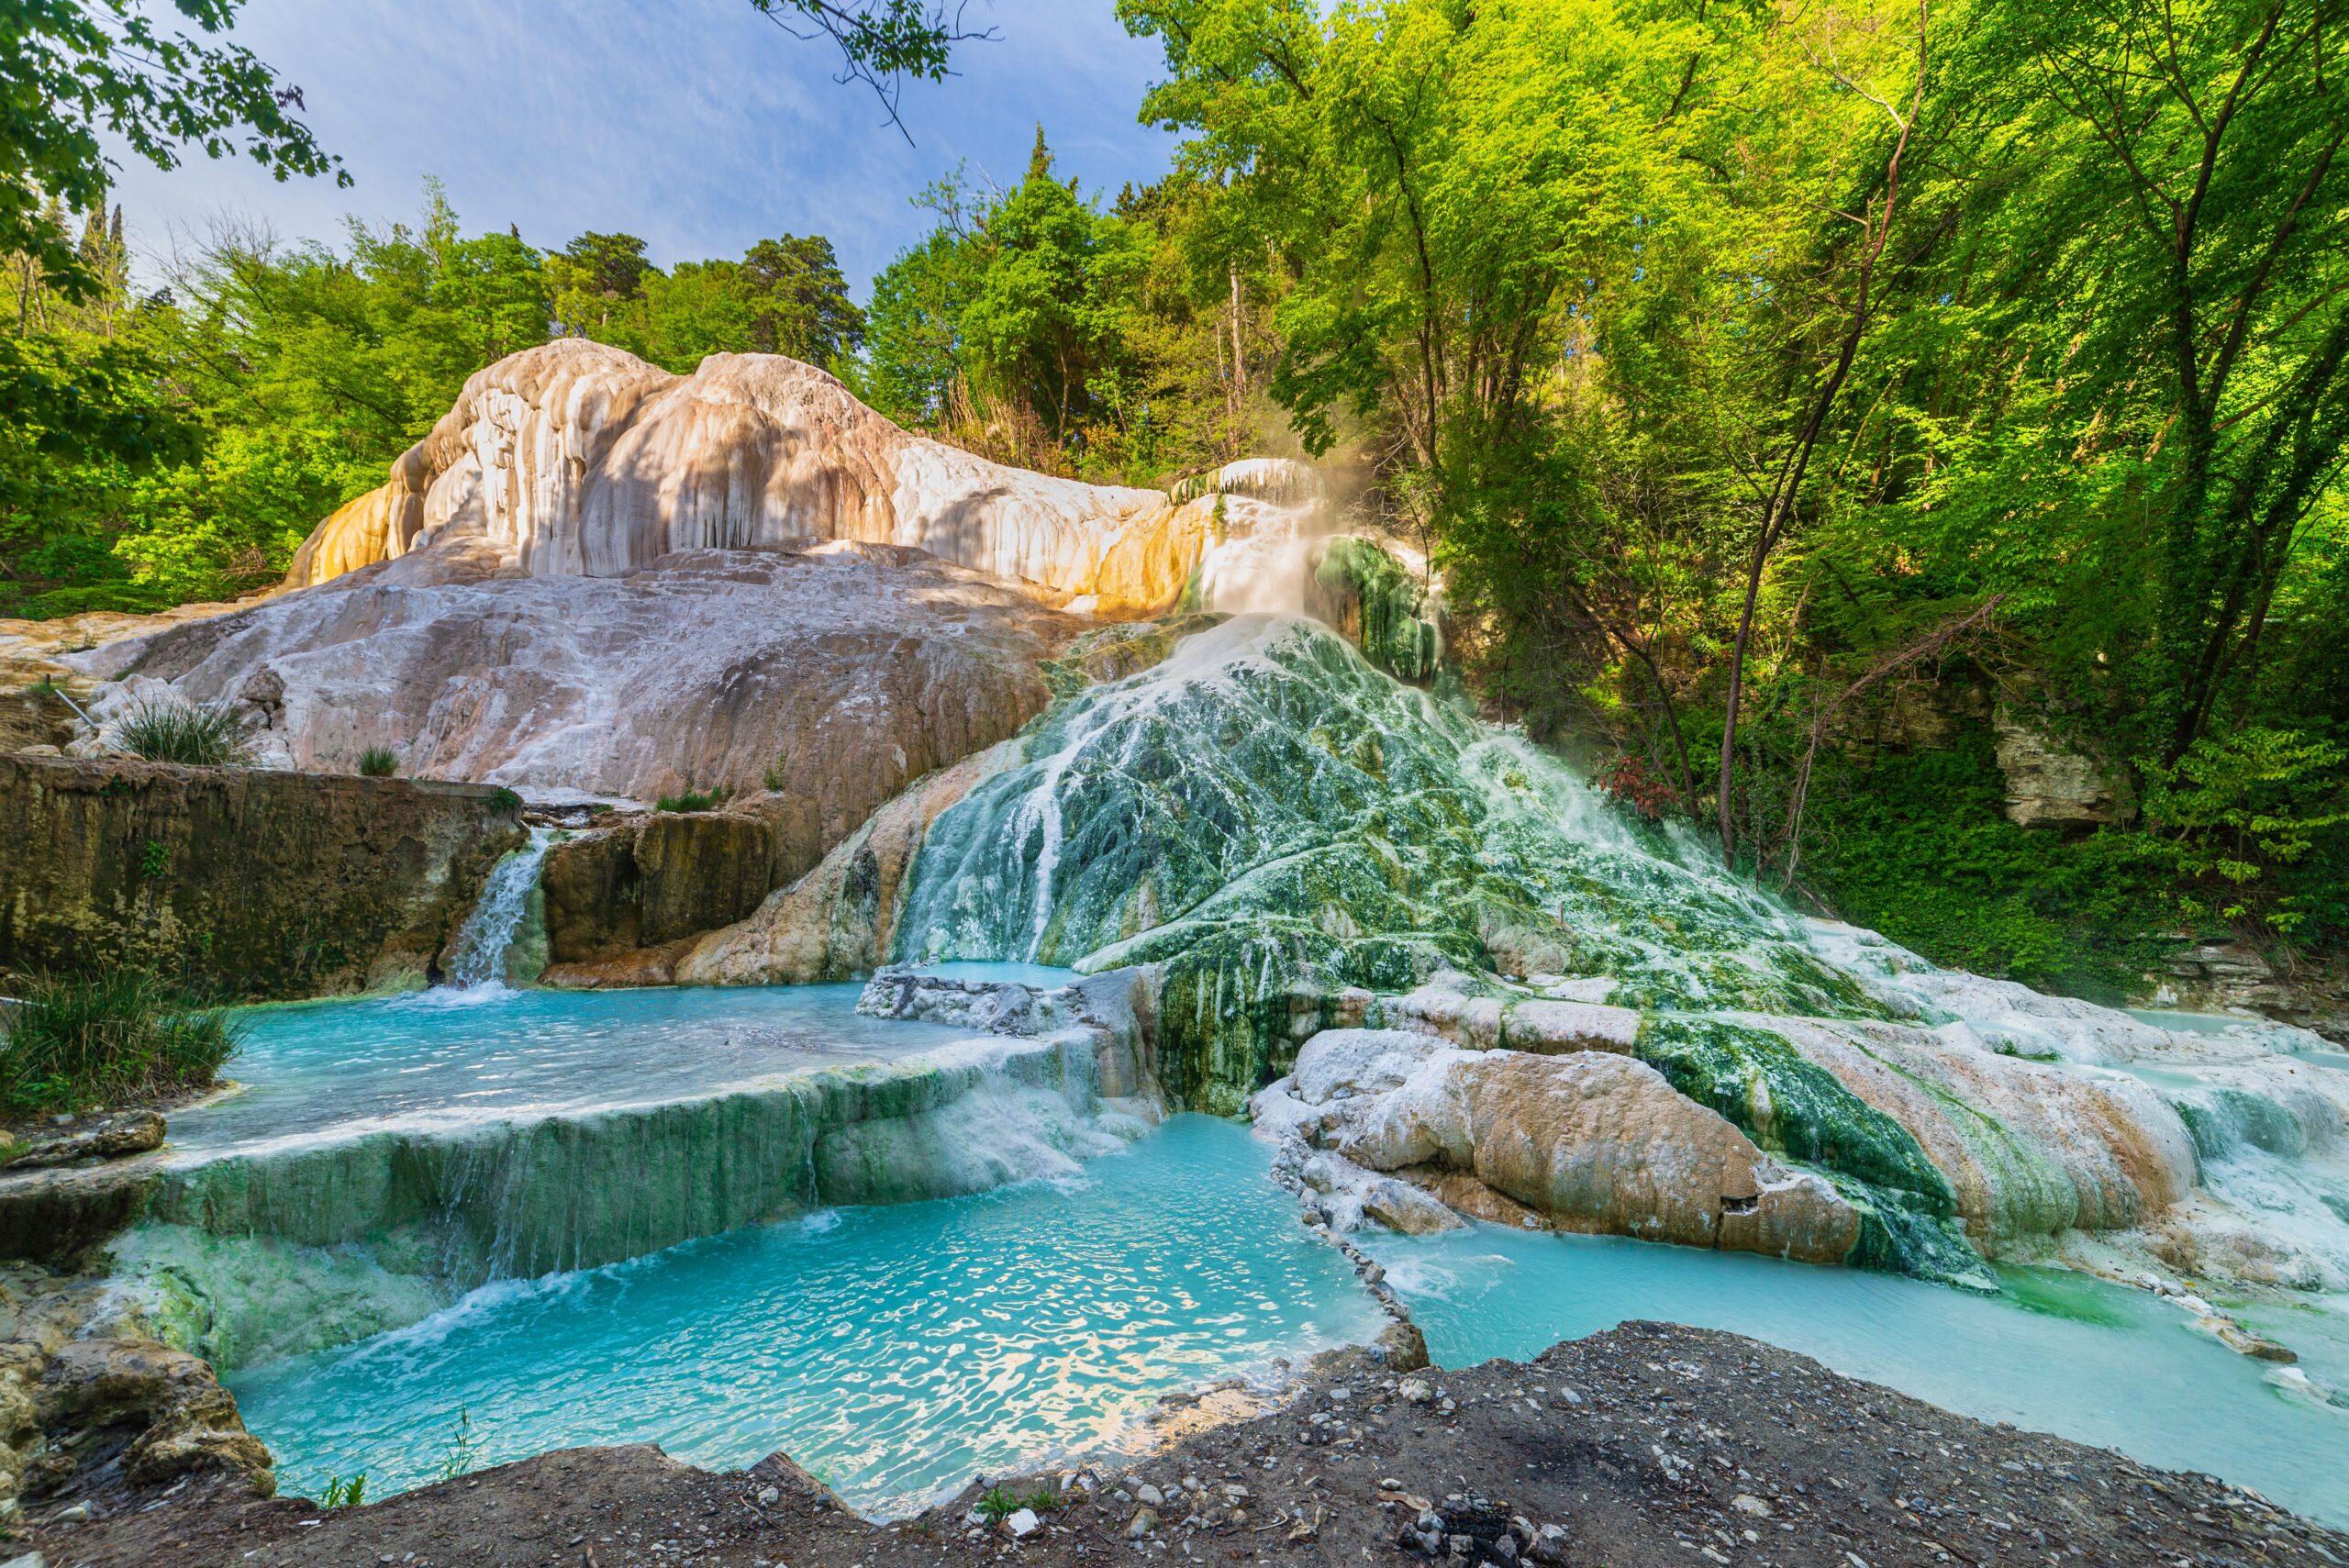 View of the unbelievably teal waters of a mineral rich waterfall at Bagni di San Filippo hot springs 